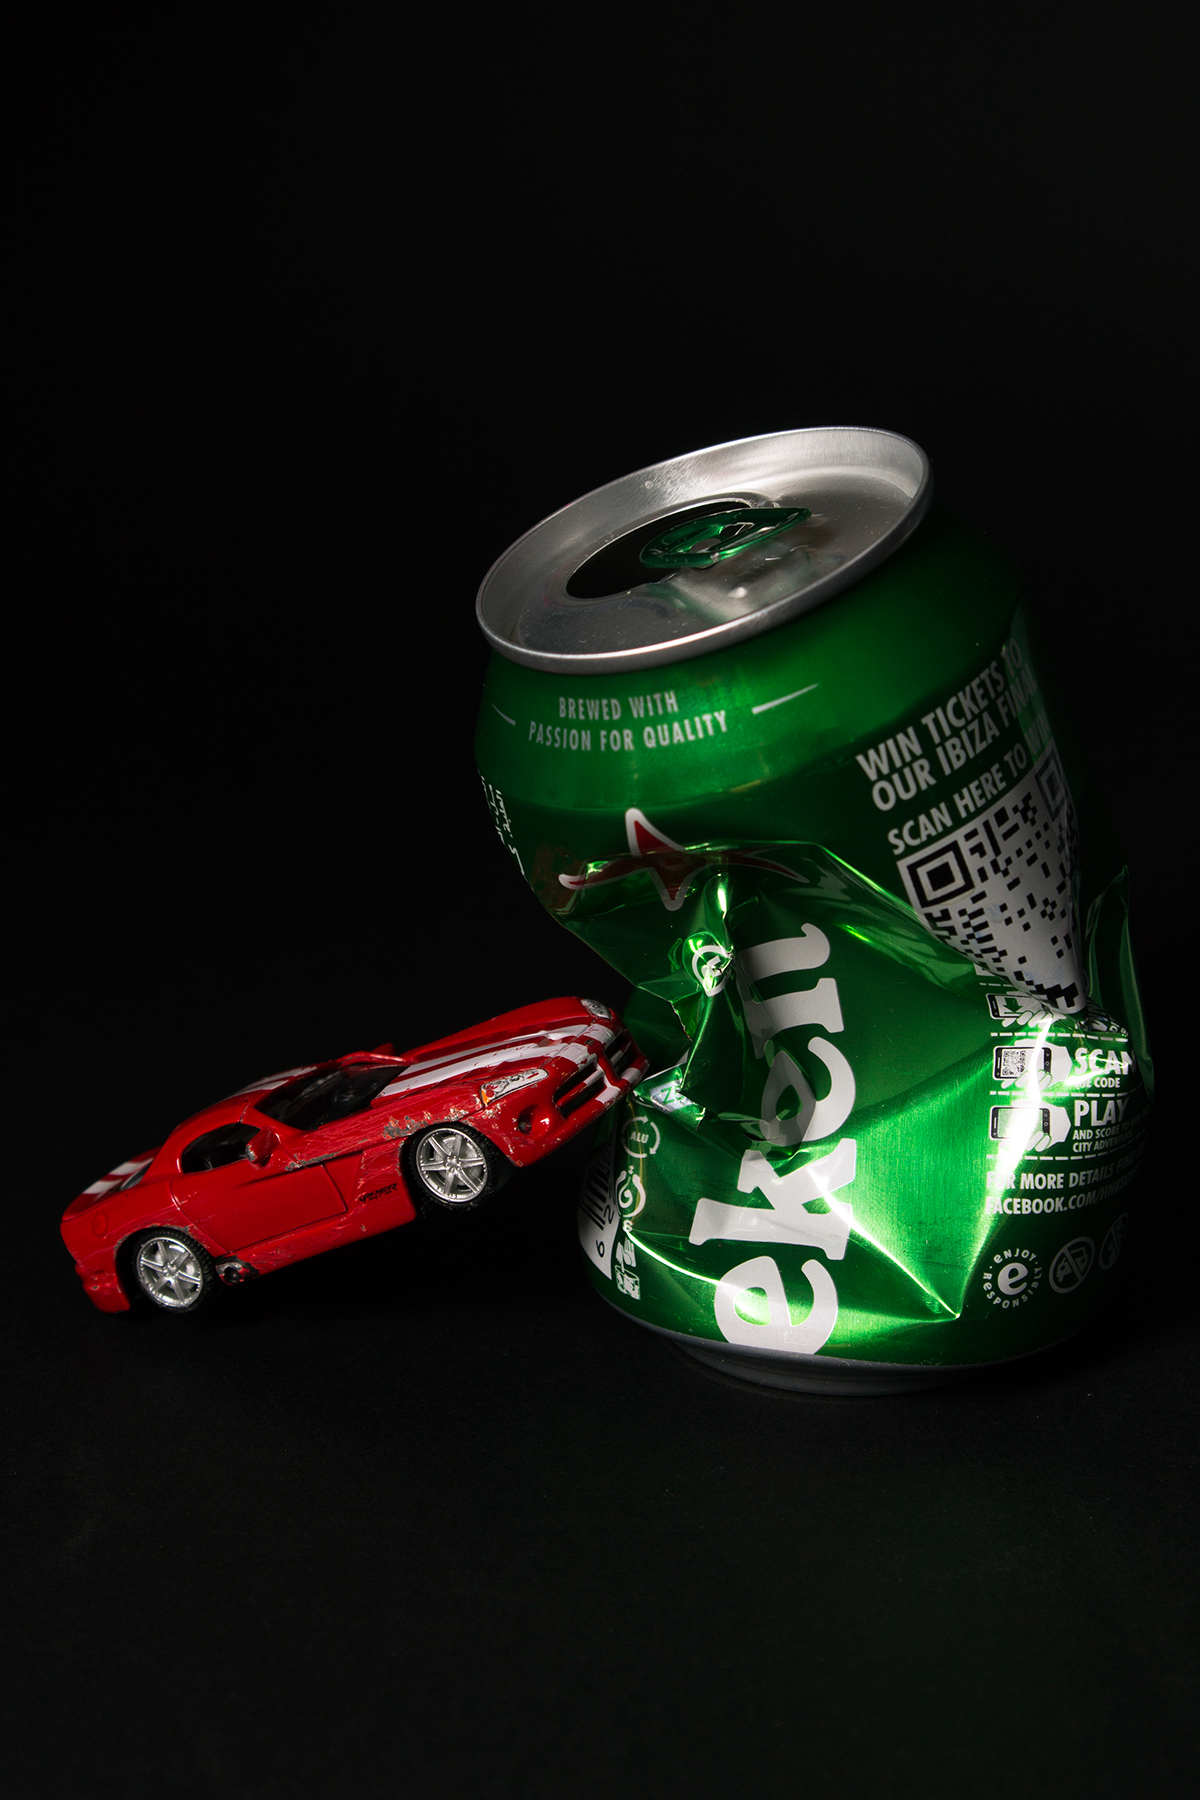 Studio Photography drink and drive campaign